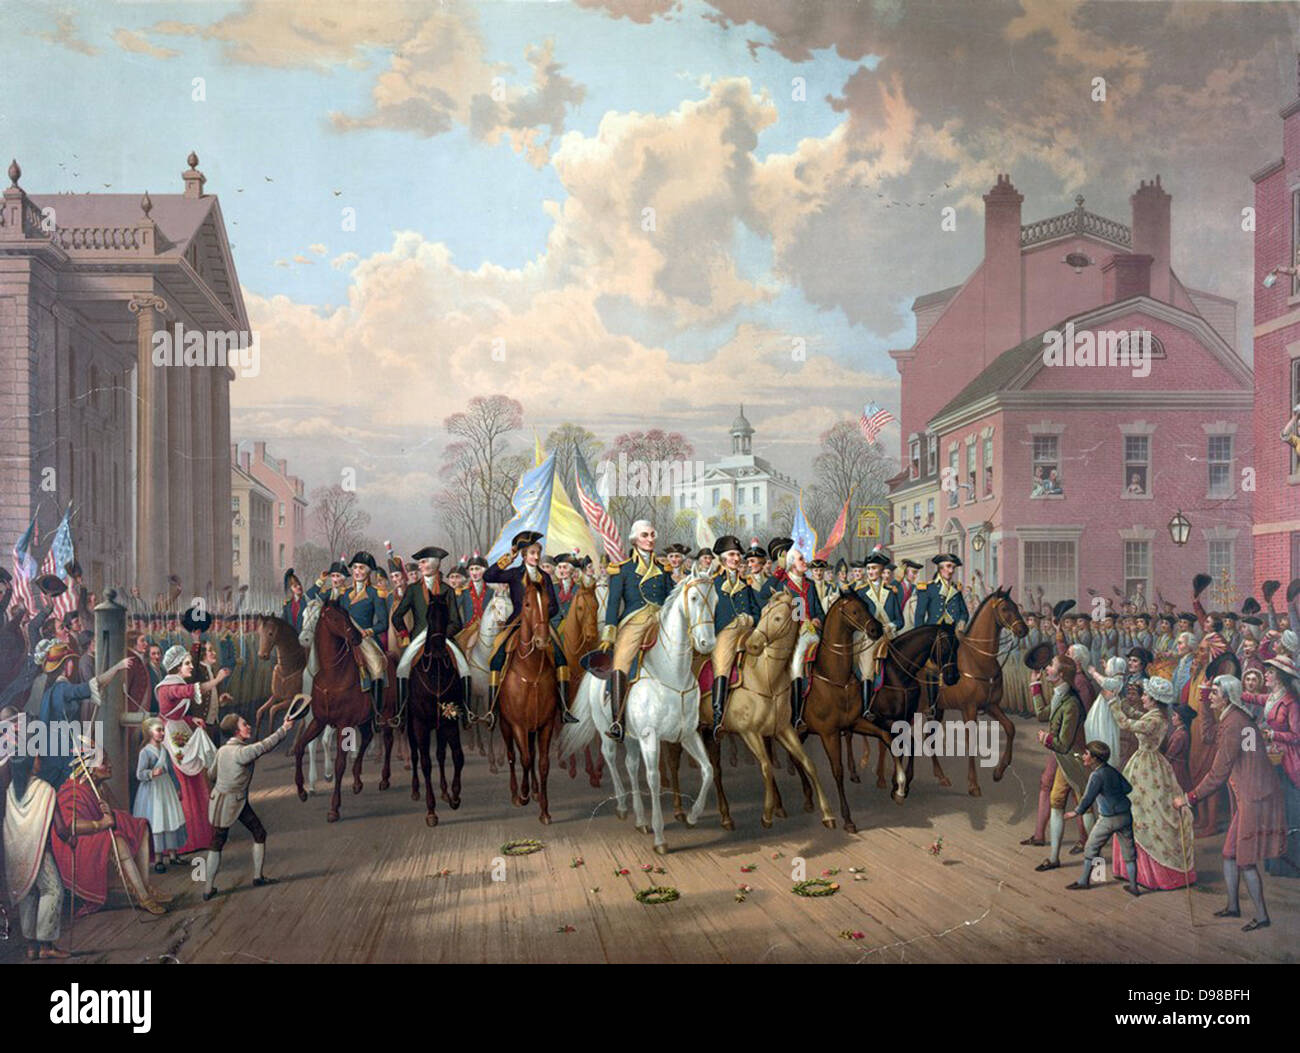 Revolutionary War 1775-1783 (American War of Independence): George Washington riding in triumph through streets of Boston after 11-month siege ended with the withdrawal (evacuation) of British forces. Chromolithograph 1879. Stock Photo